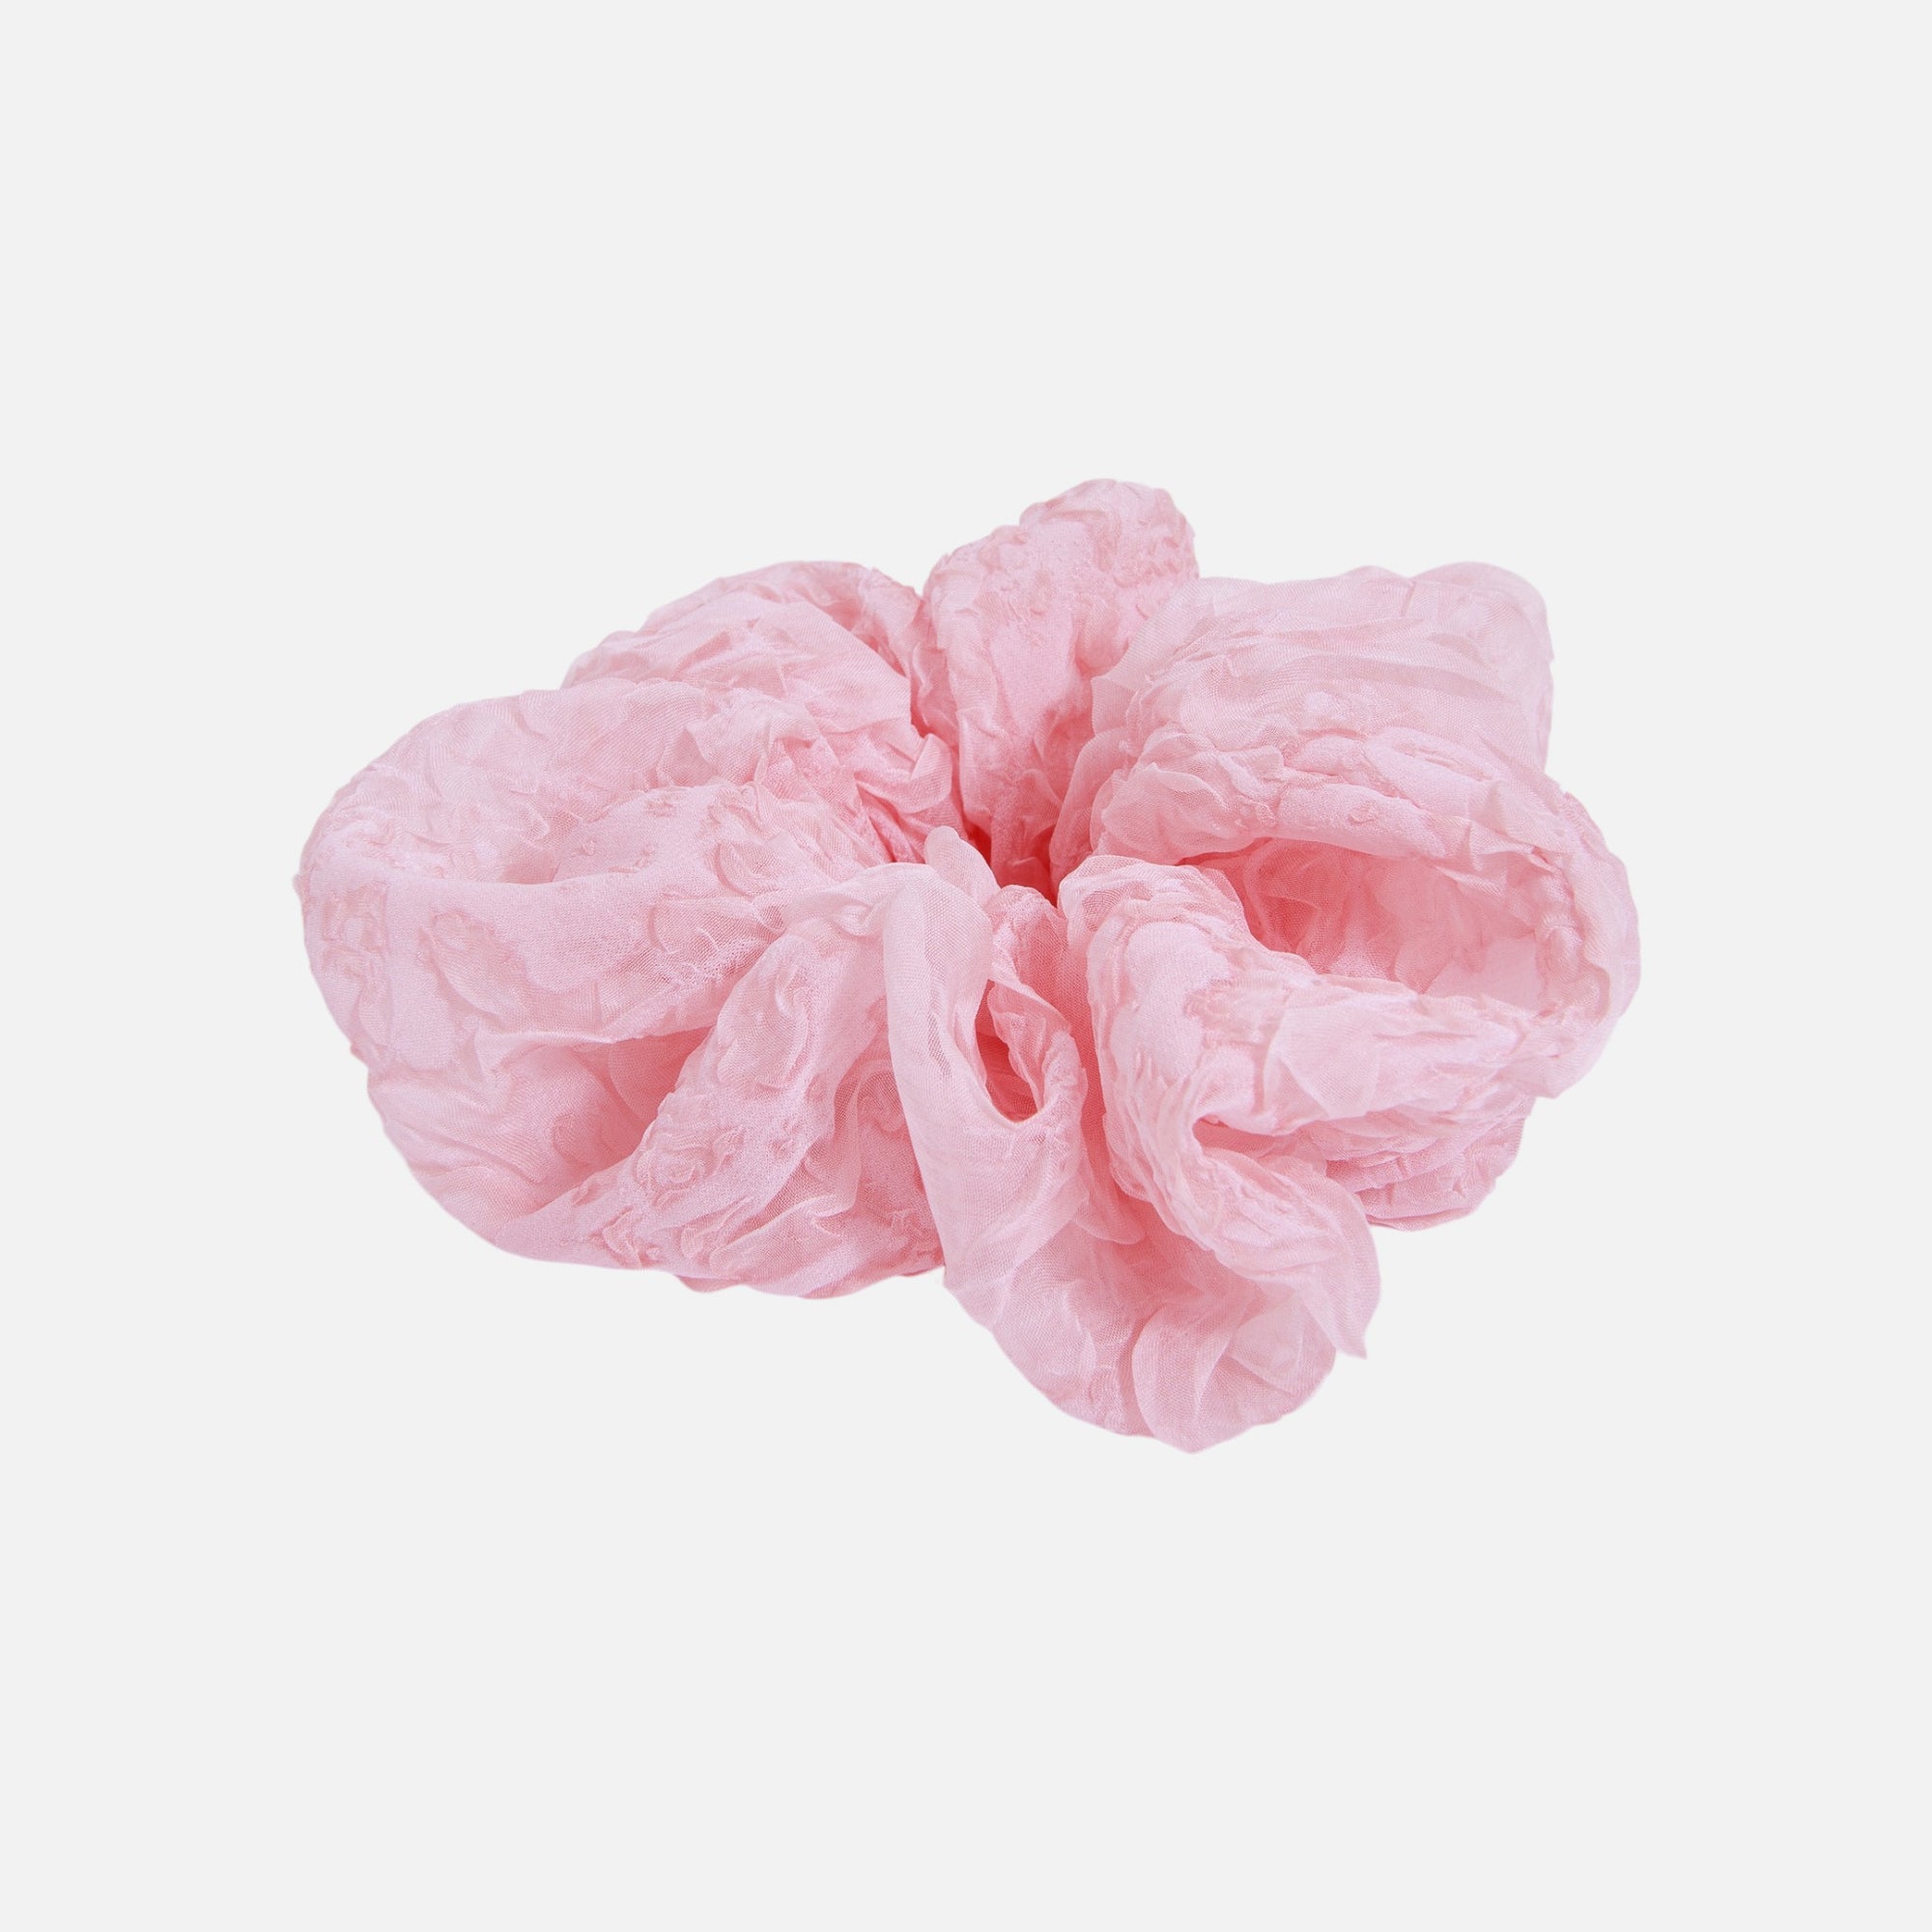 Oversized pink lace scrunchie